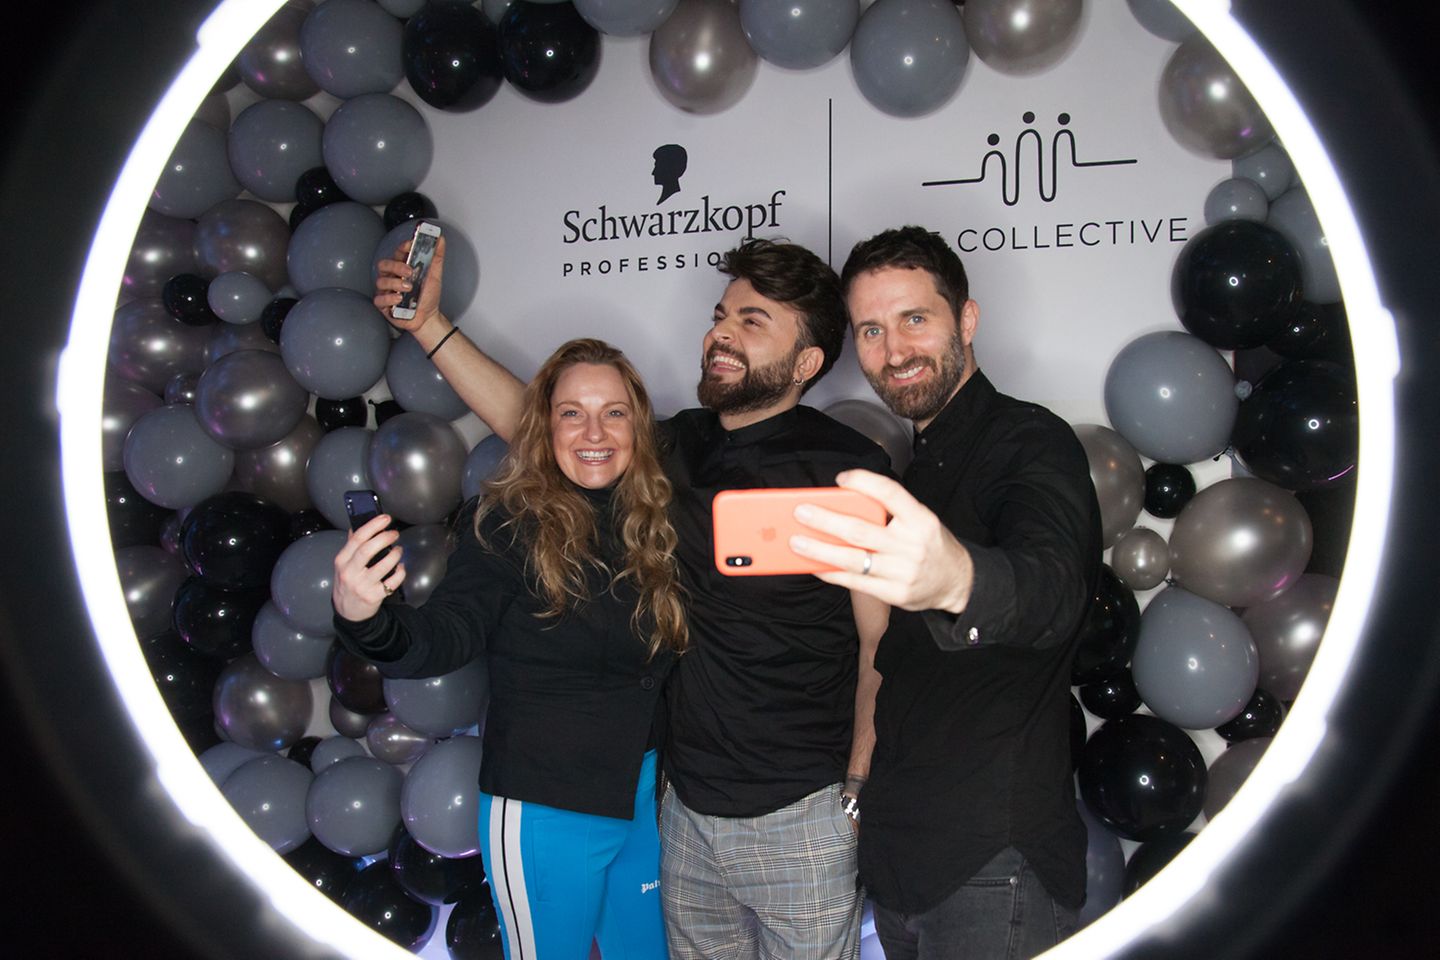 Schwarzkopf Professional - The Collective